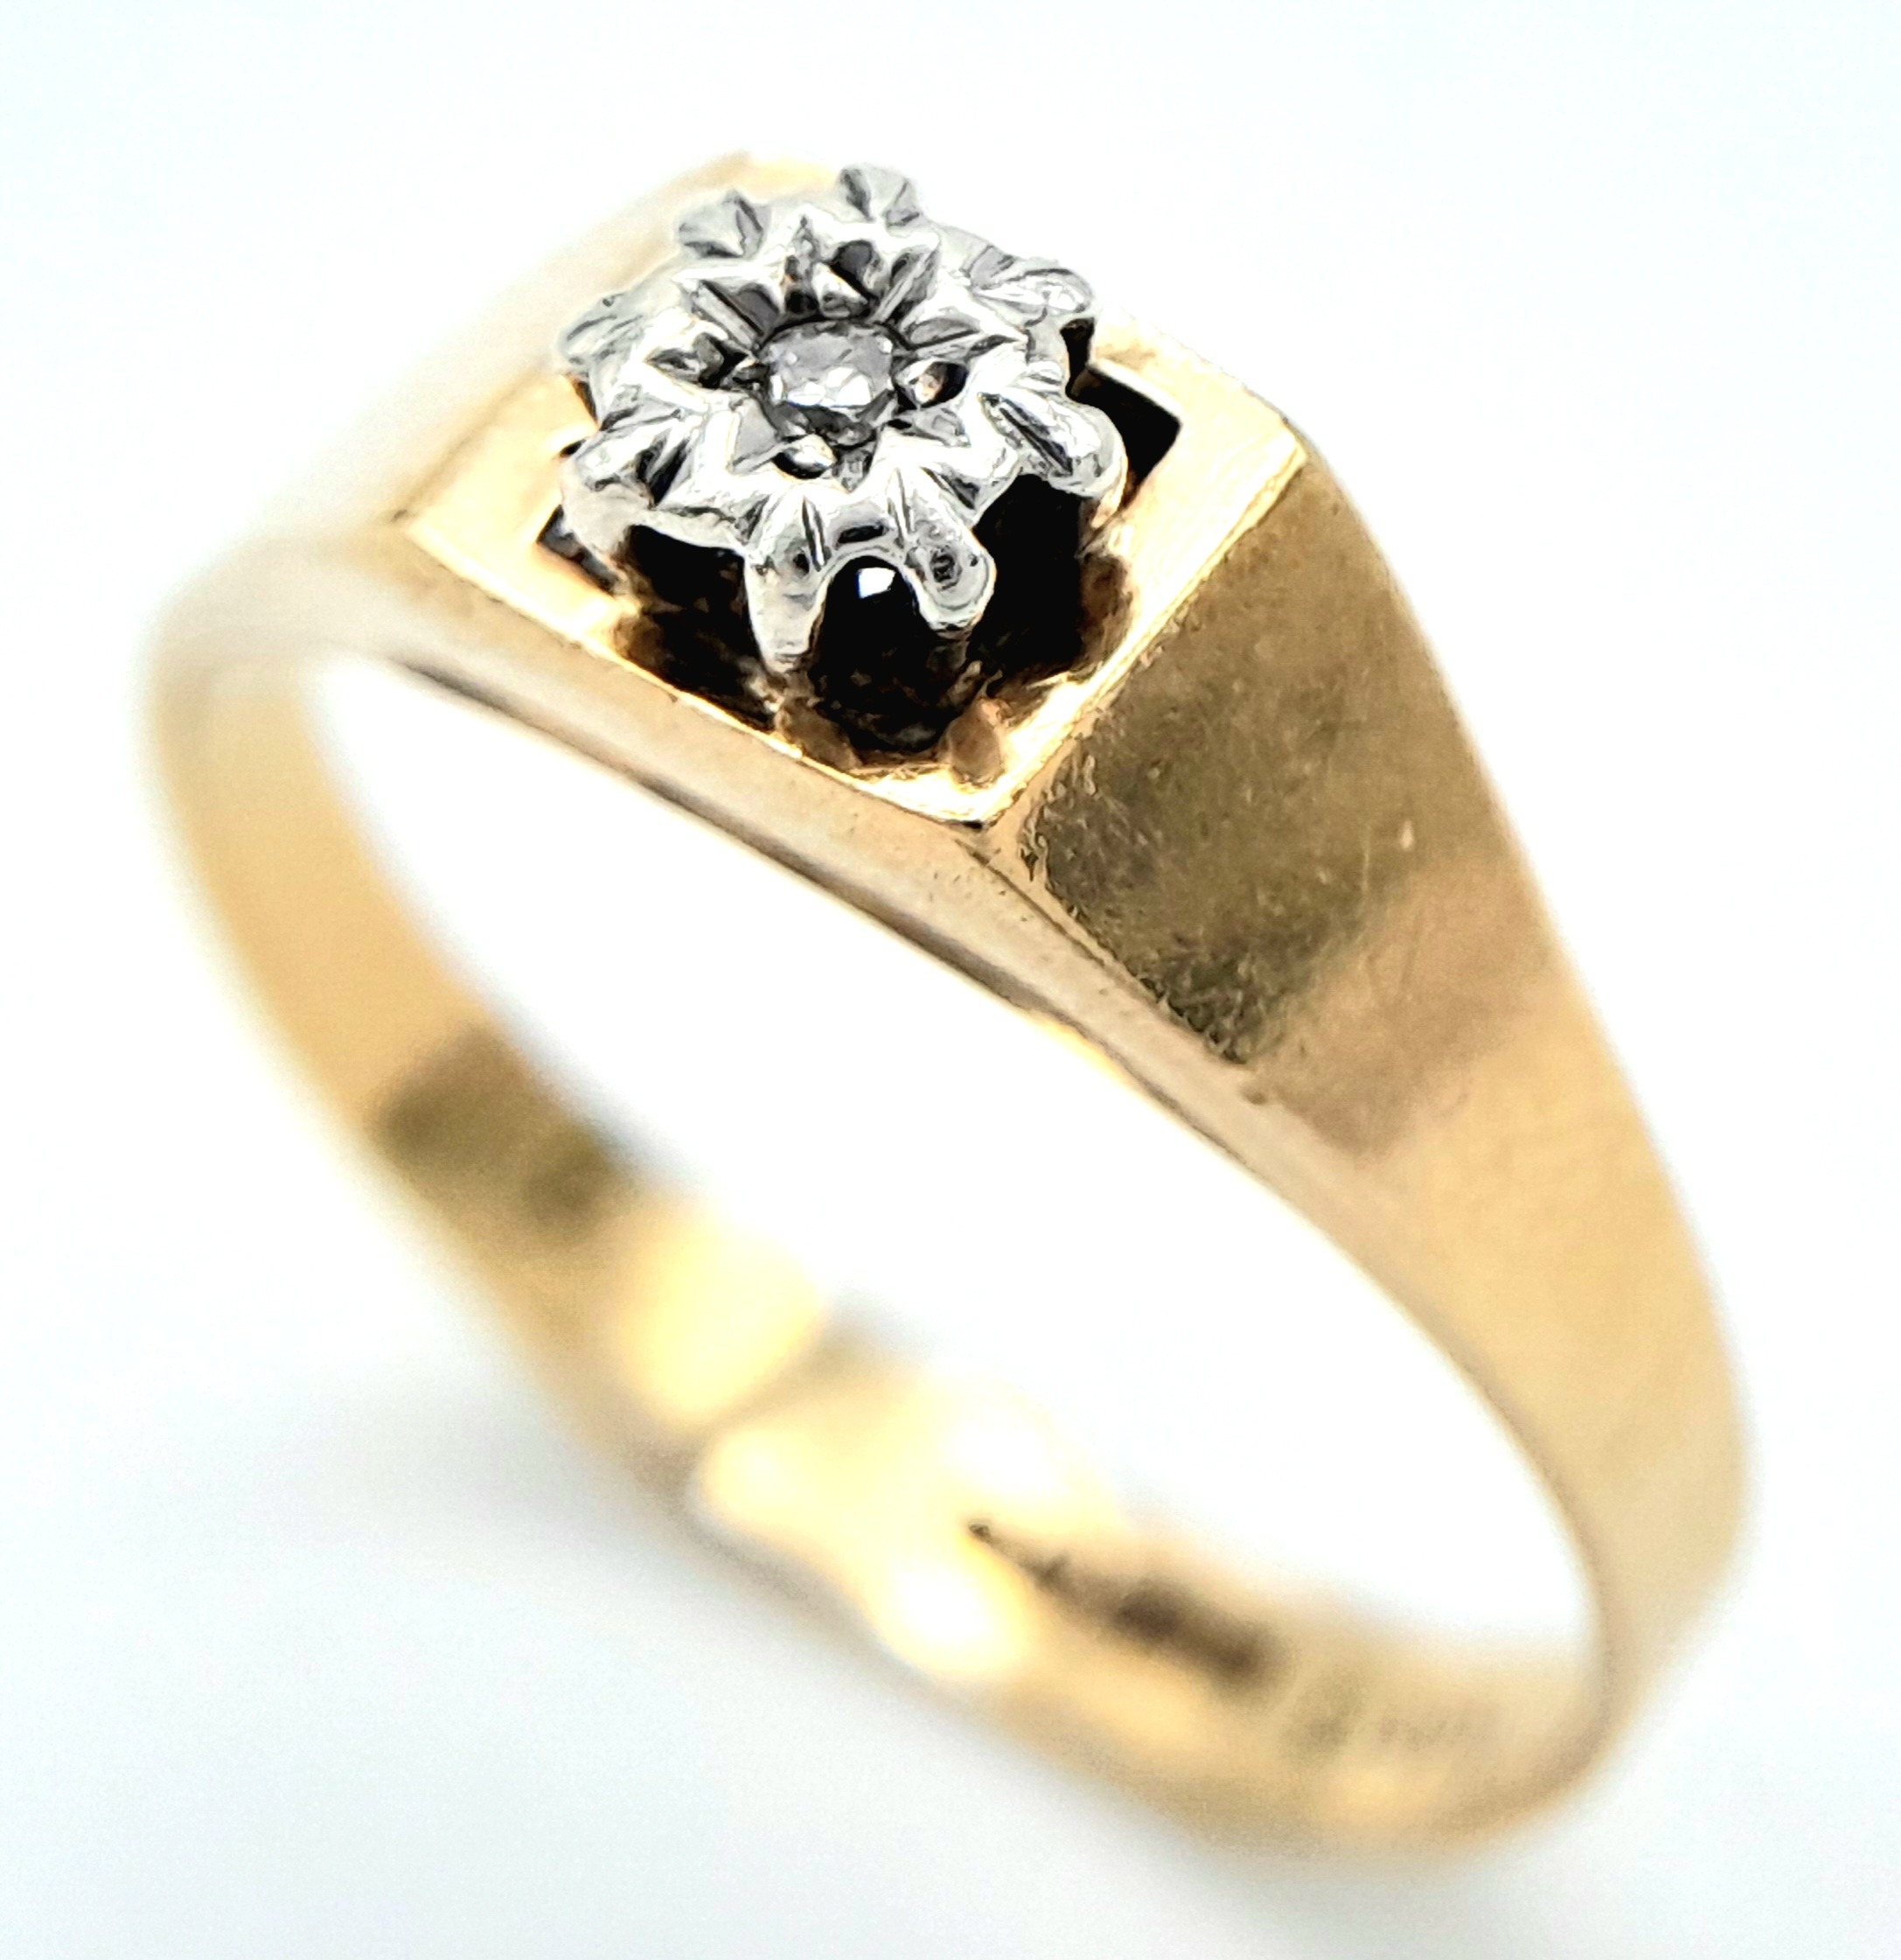 A 9ct Yellow Gold Diamond Signet Ring, 0.03ct diamond, 2g weight, ring size O. ref: SH1472I - Image 3 of 6